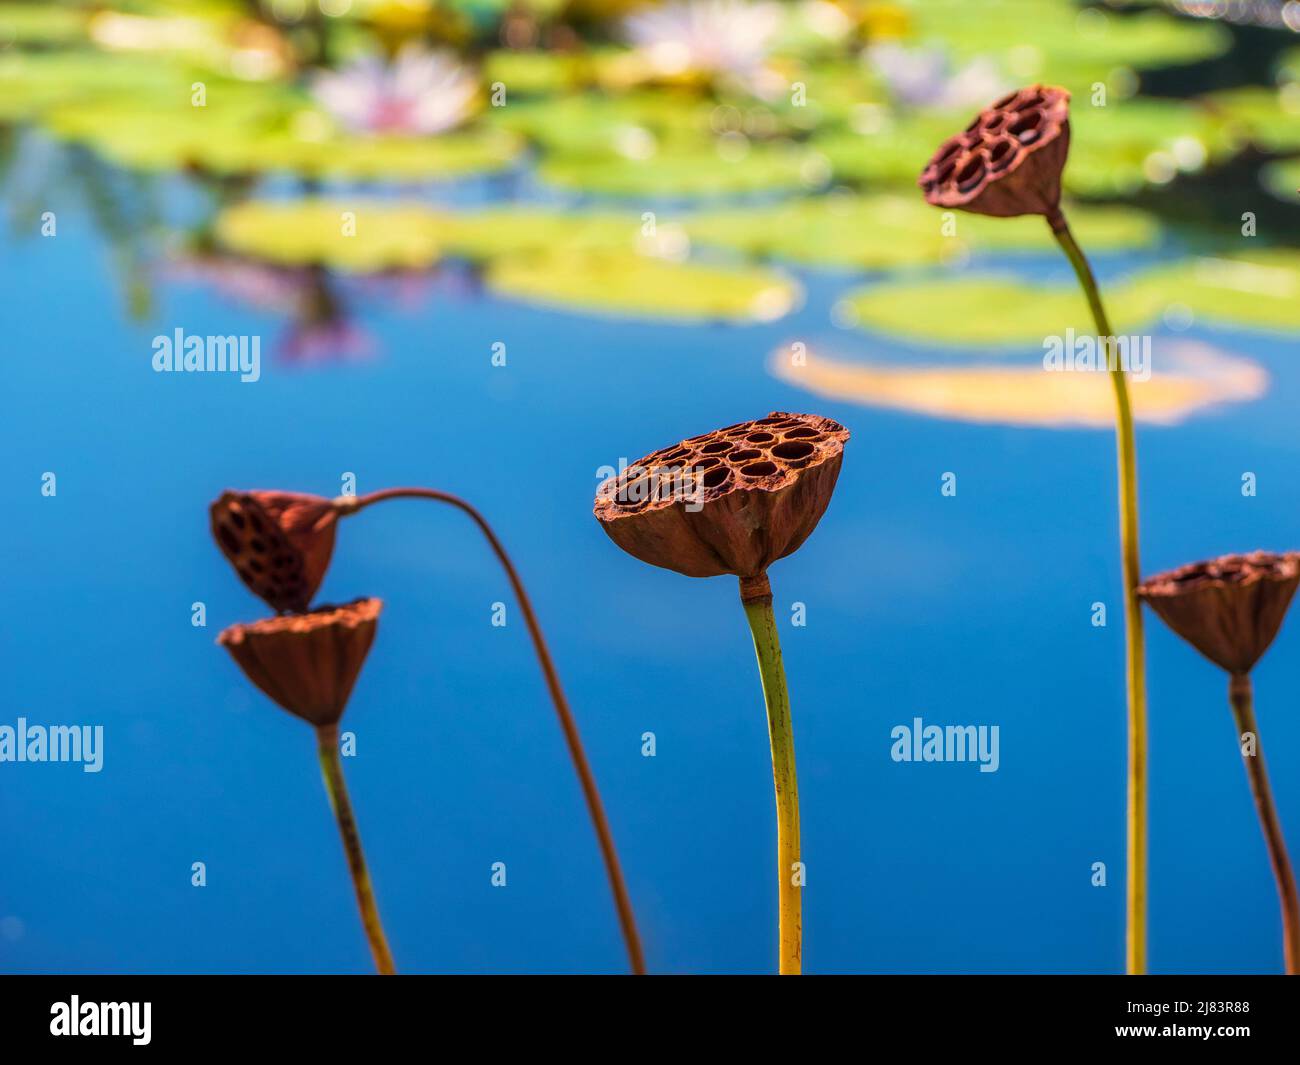 Graceful dried lotus pods, Nelumbo nucifera, in a lilypond. Stock Photo